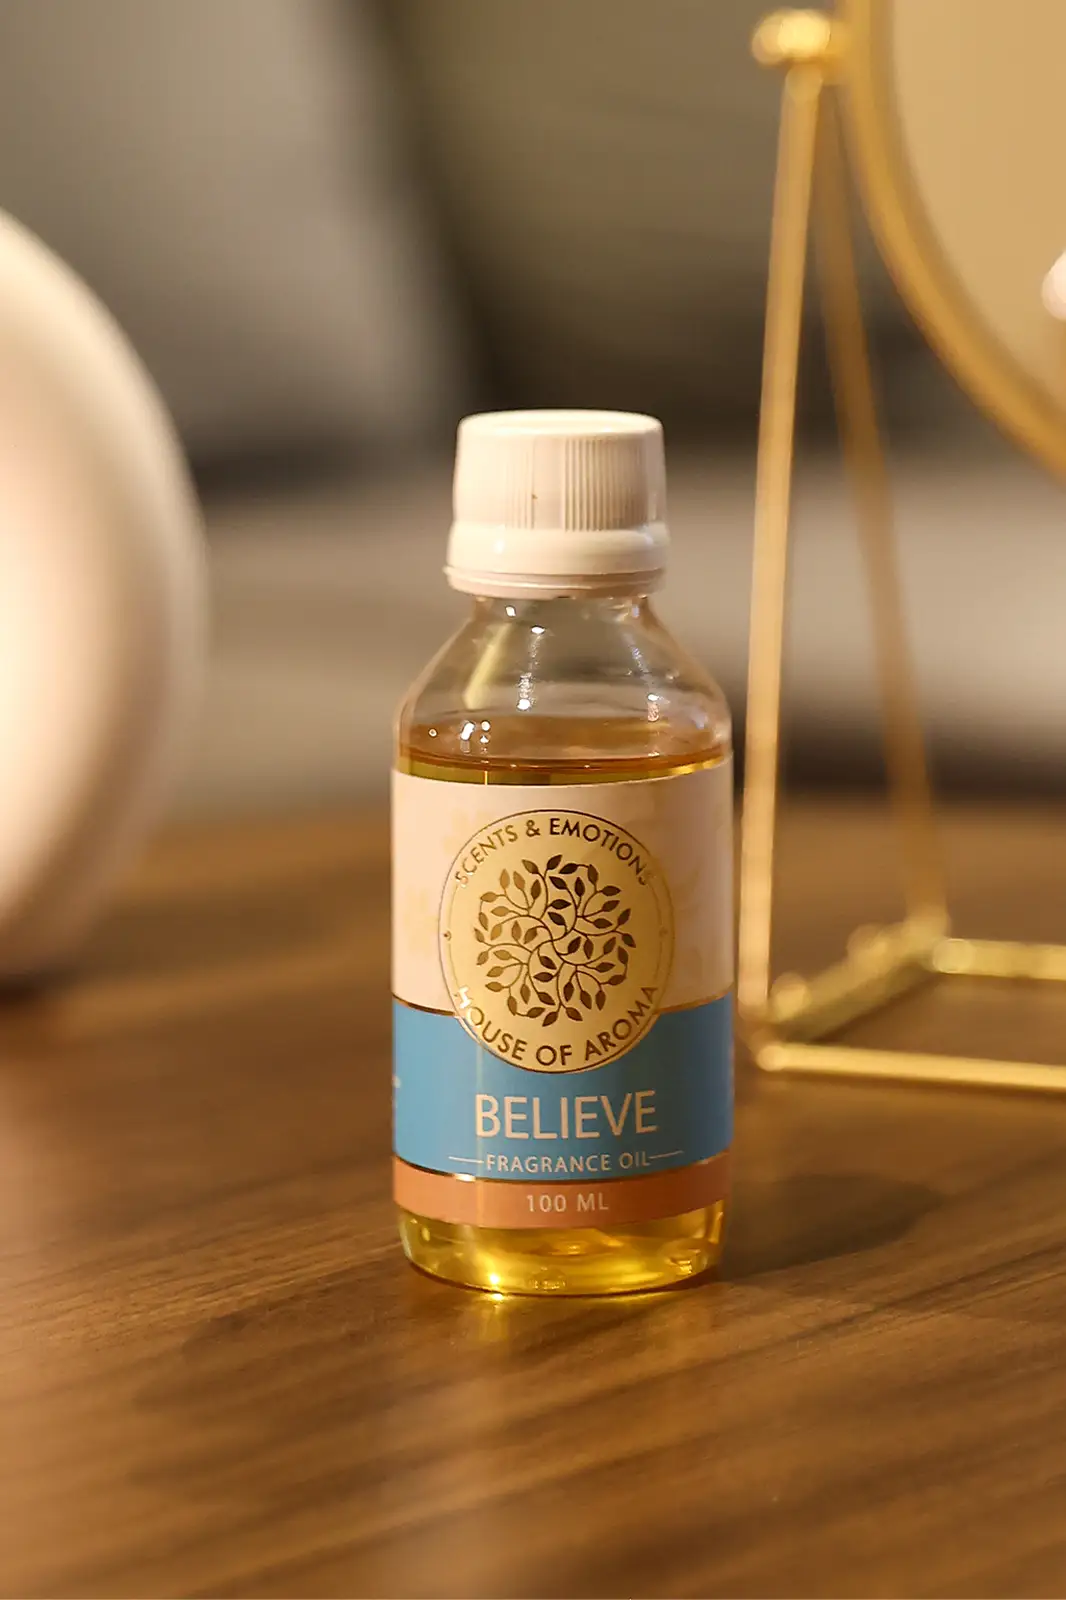 believe fragrance oil 100ml, Fragrance Oil, Aroma oil, Synthetic oils, Fragrance oil for candles, oil for diffusers, Aromatic oil, Candle oil, Aromatherapy oil, oil manufacturers, House of Aroma, believe fragrance oil, believe fragrantica, fragrance of happiness, believe oil, believe aroma oil, believe scented oil, believe oil benefits, believe oil uses